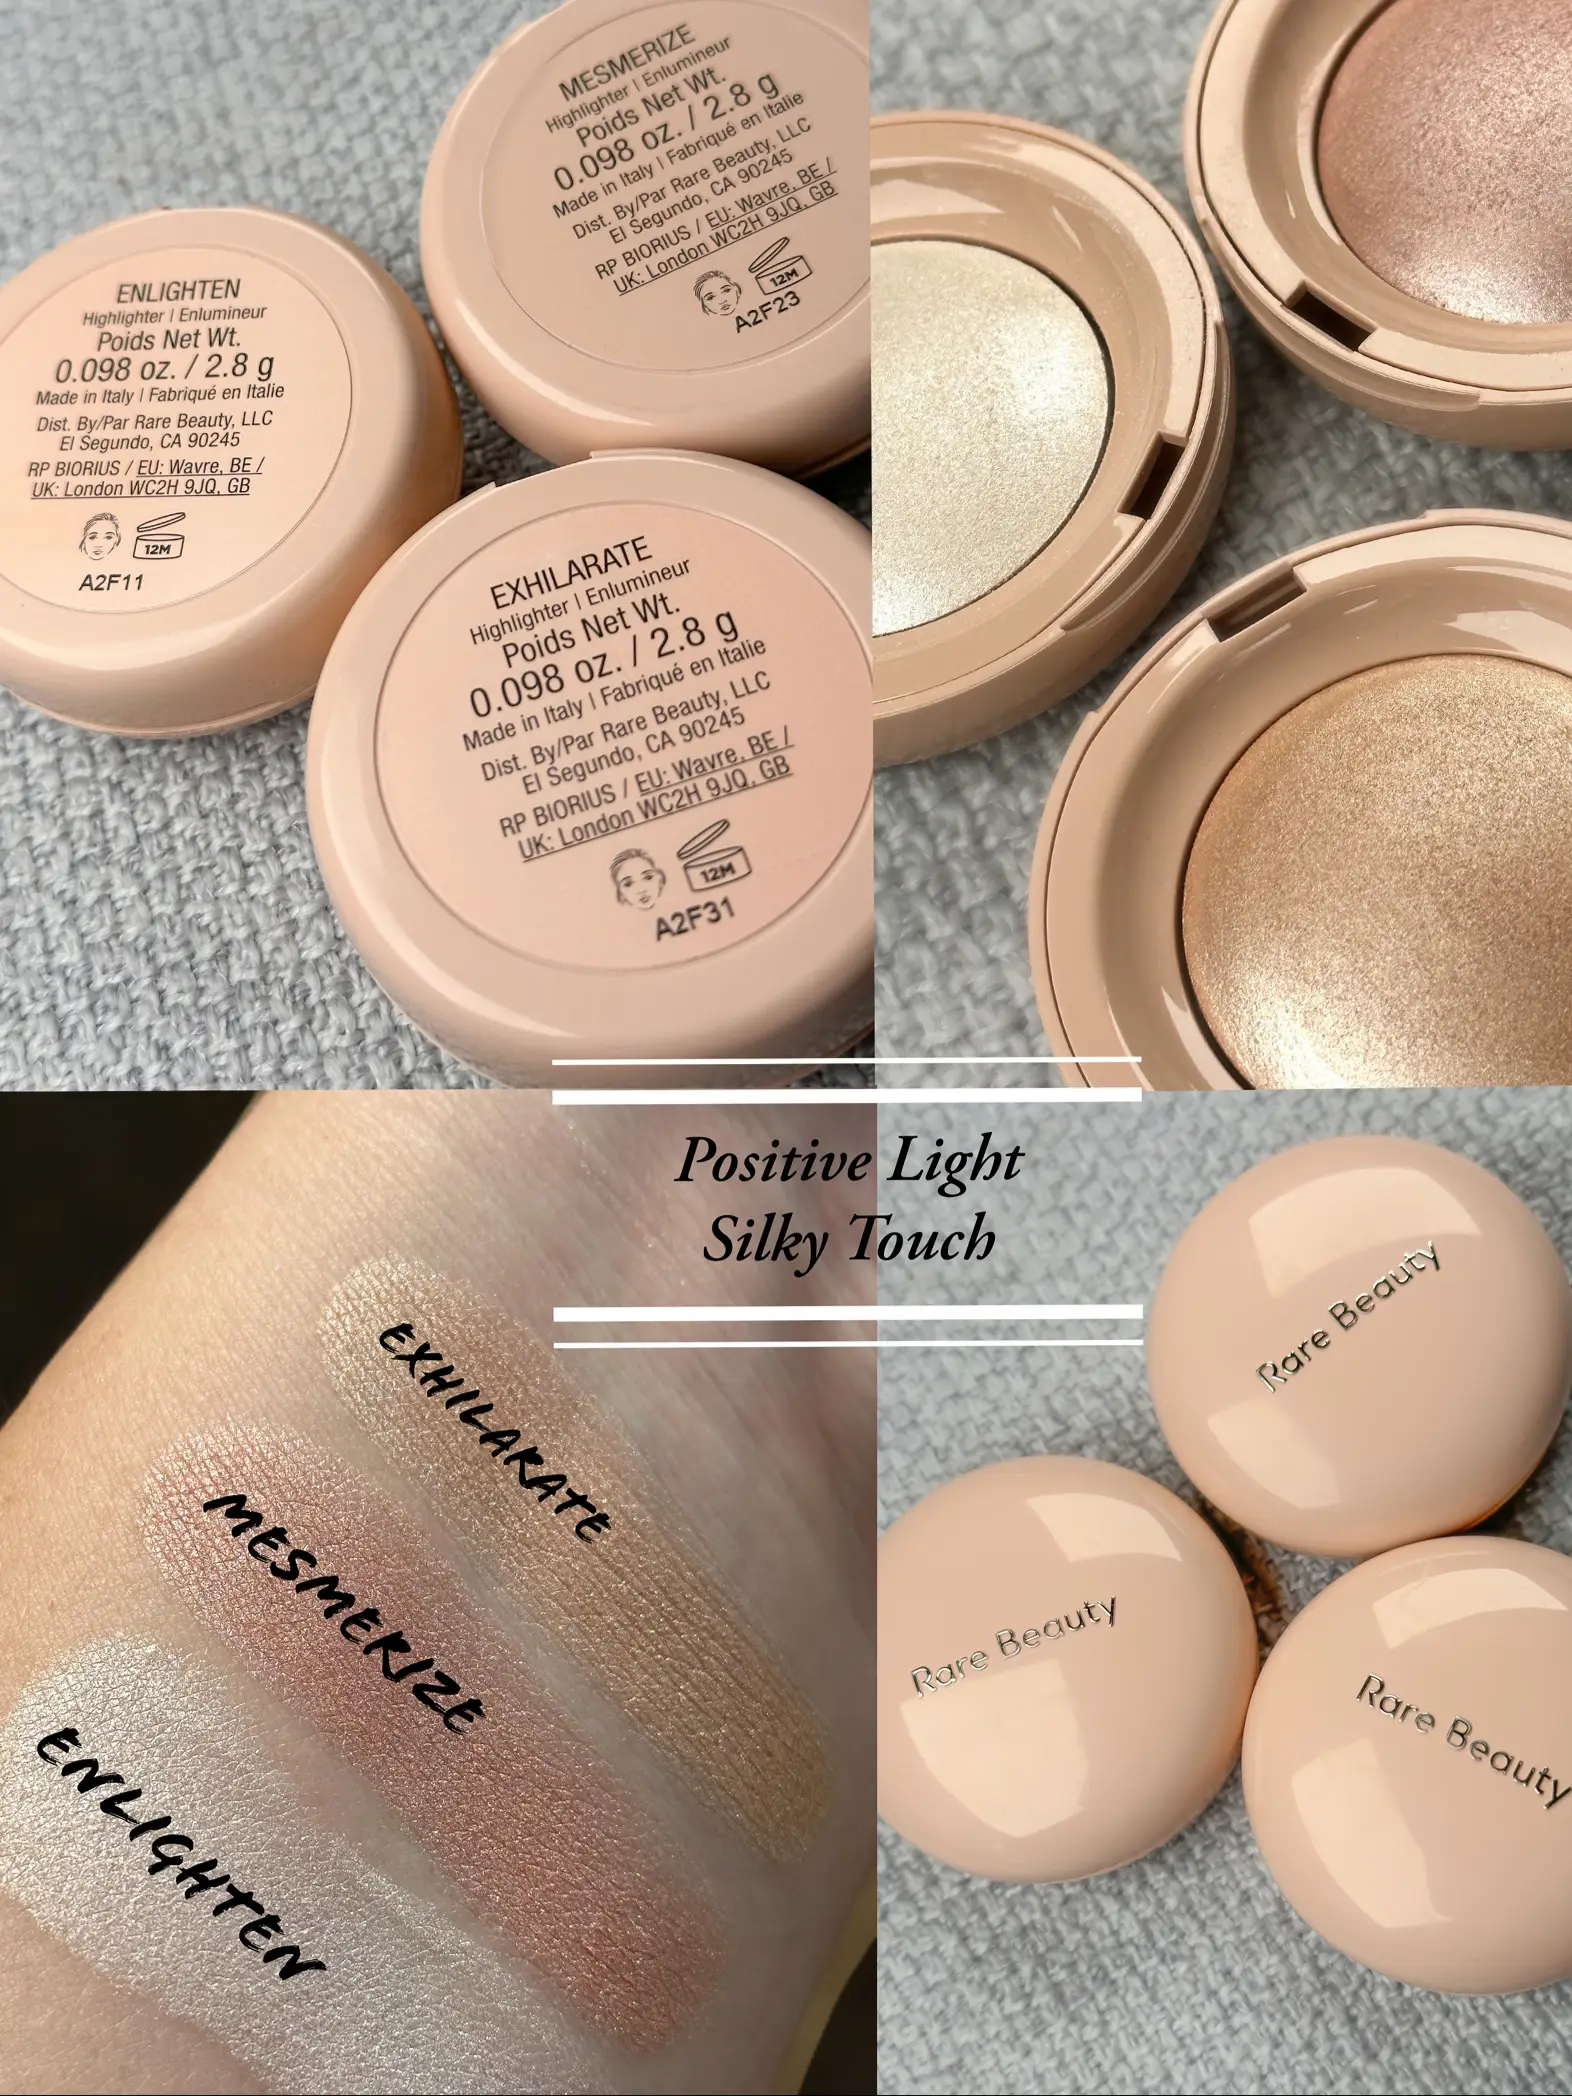 Trying out these cute aesthetic highlighters everyone is raving about!, highlighters